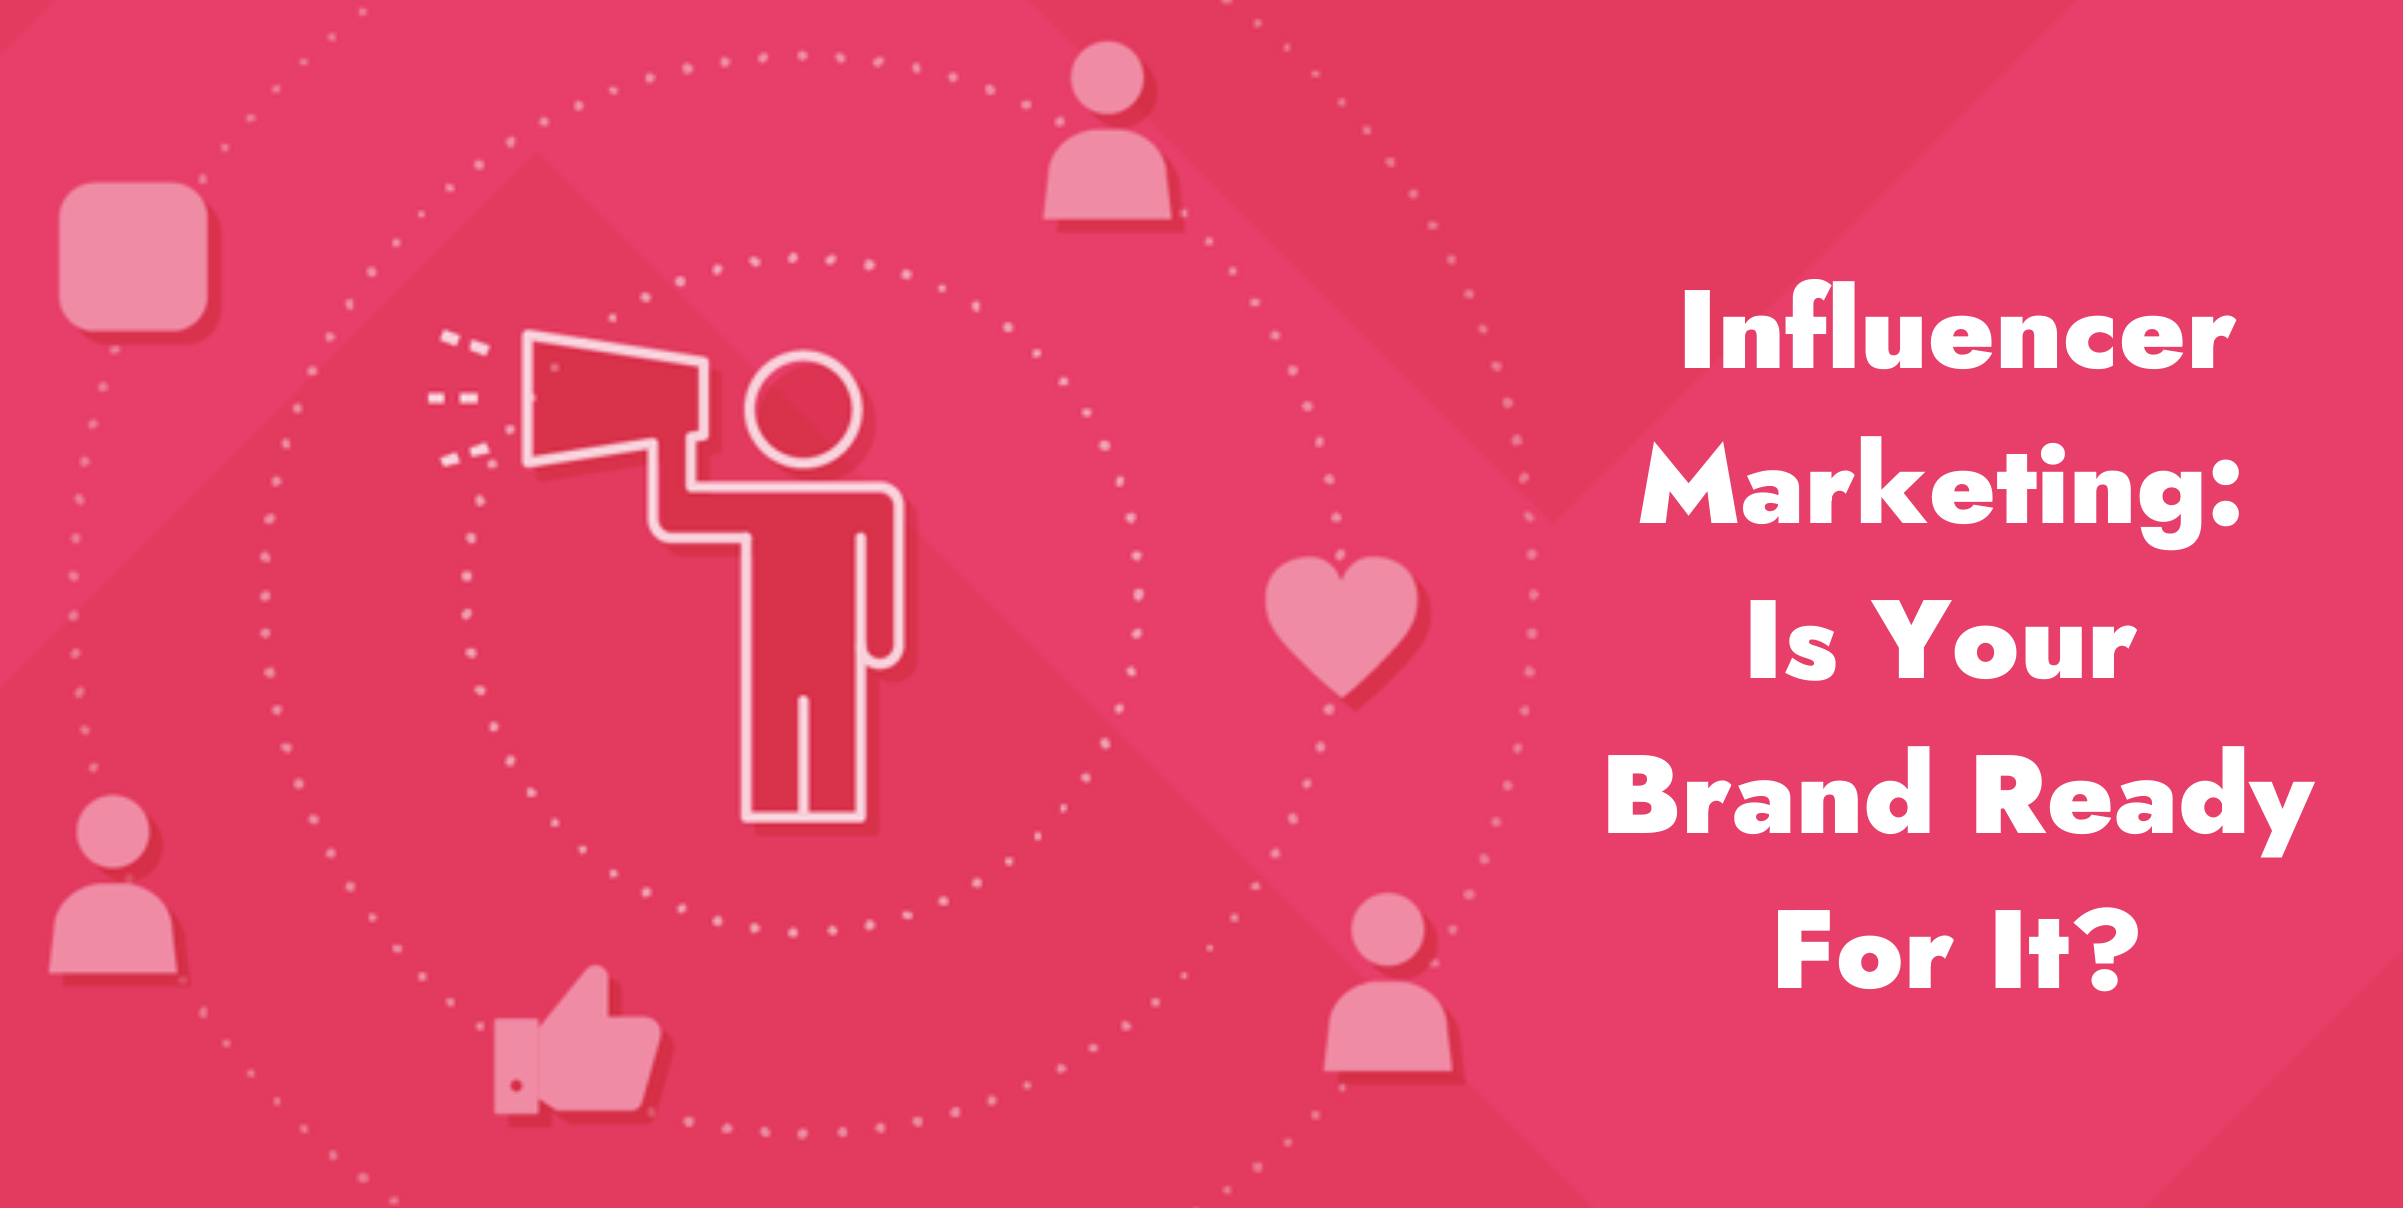 Creating an Influencer Marketing Strategy? Get your basics right.